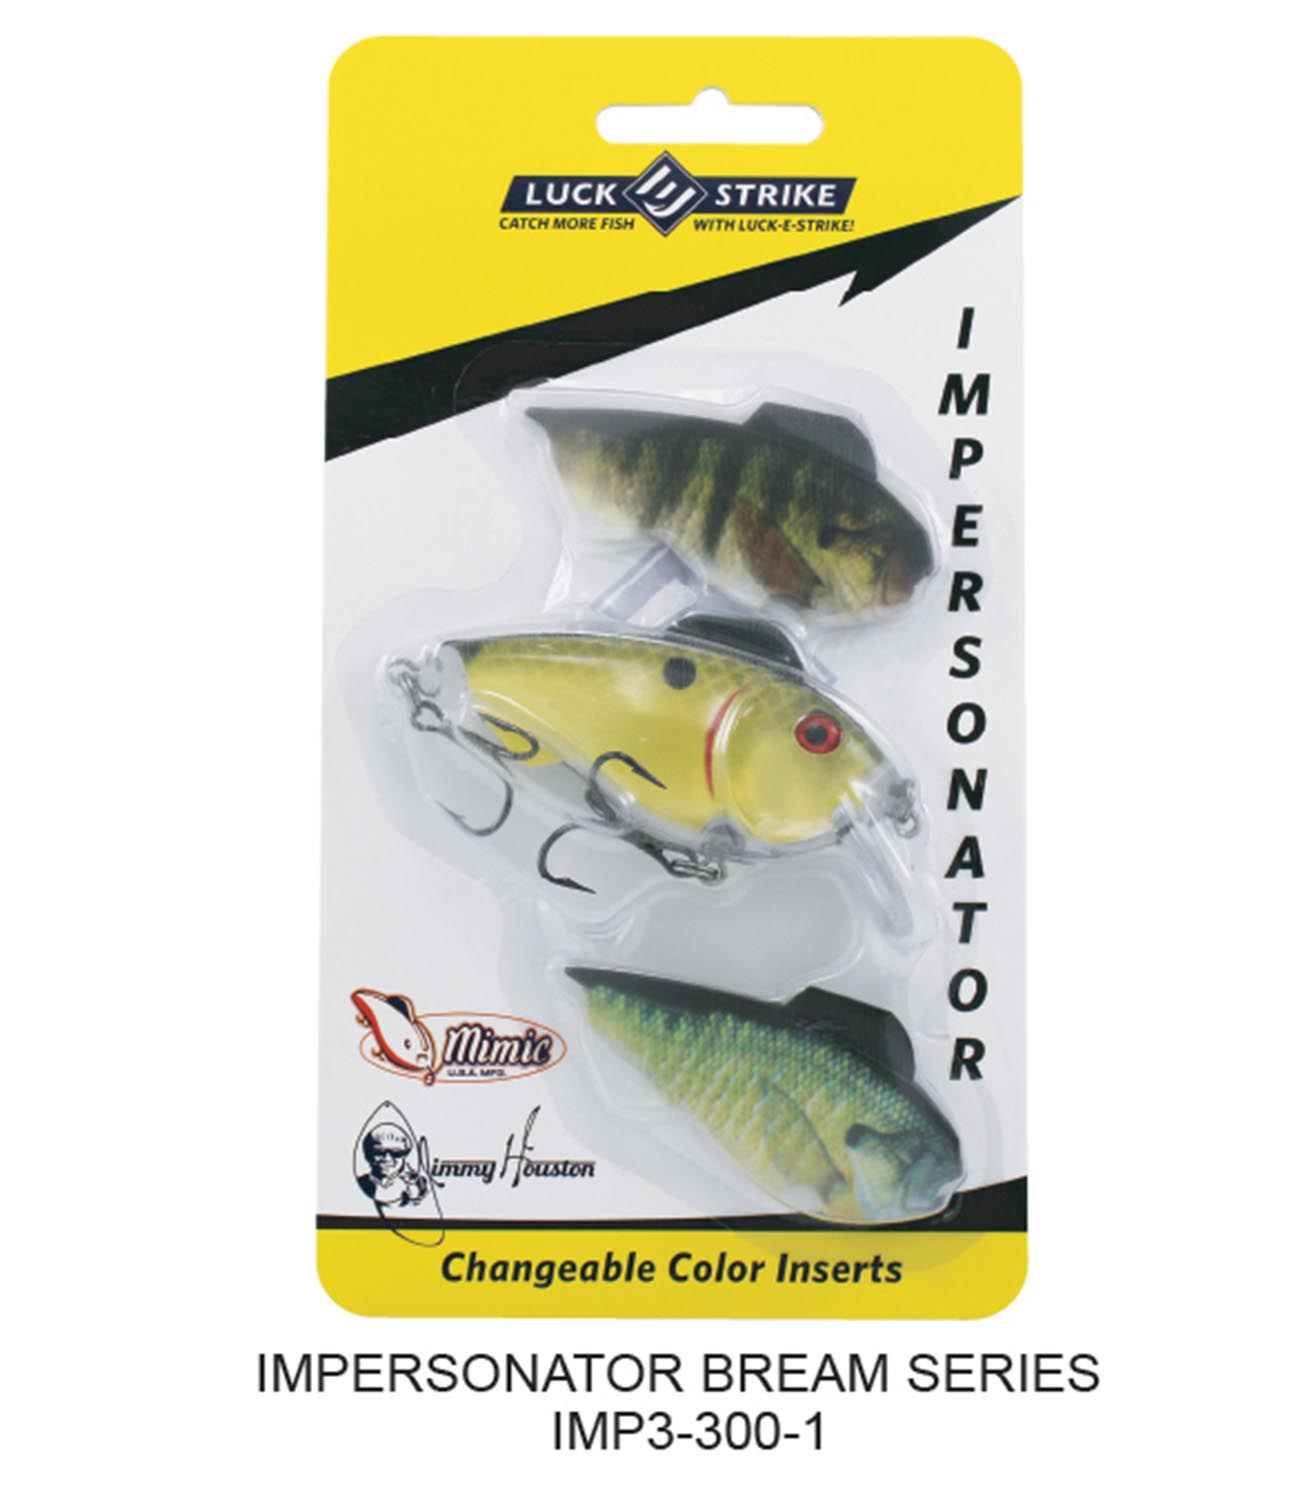 IMPERSONATOR BAIT FISH SERIES PACKS (with 3 inserts) – Jimmy